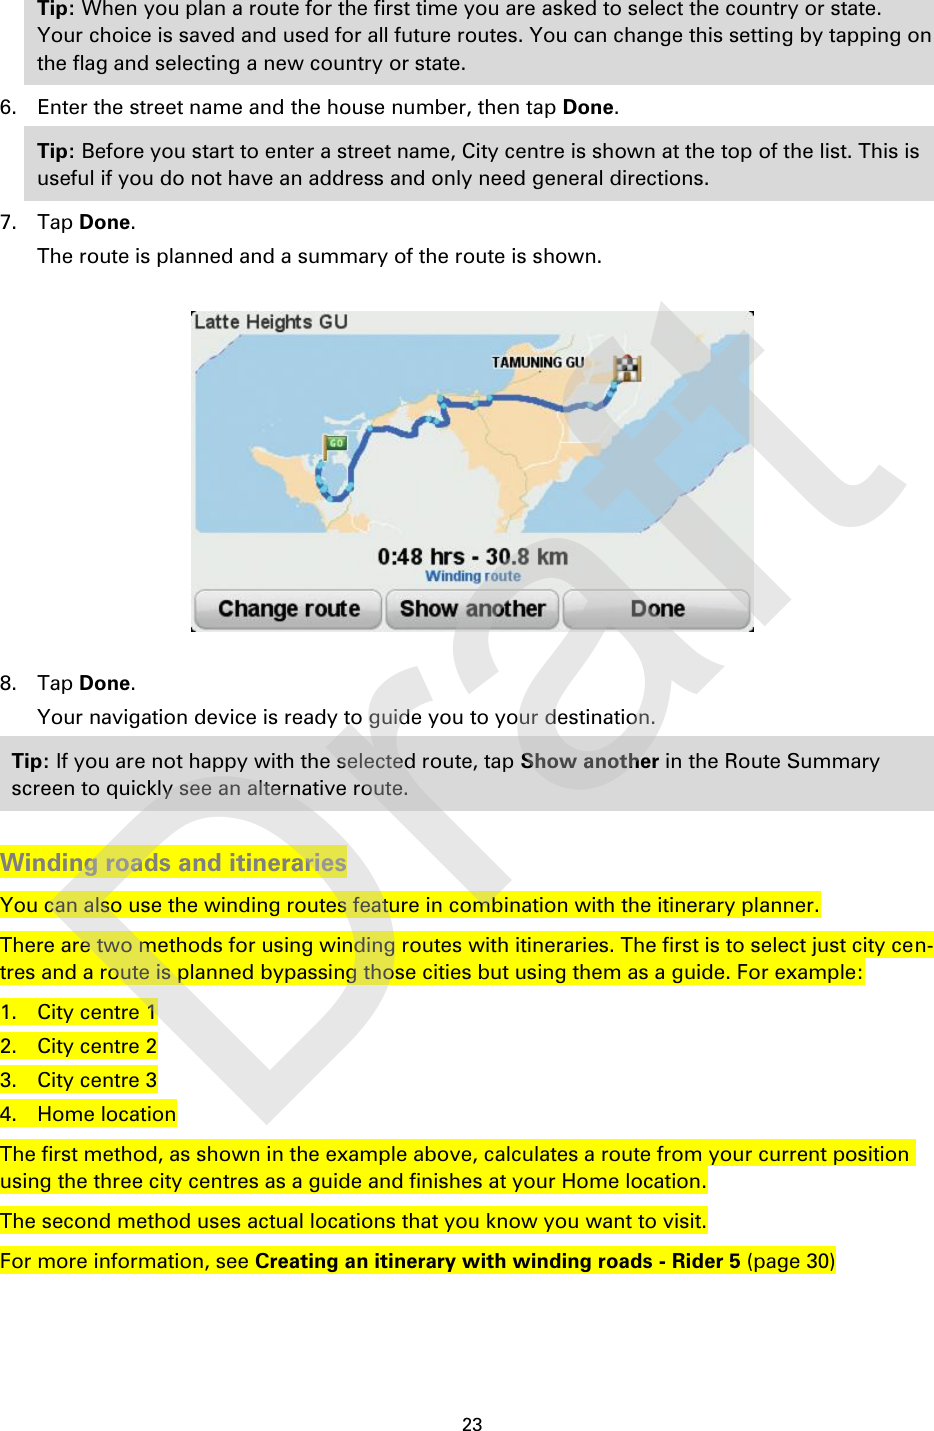 23    Tip: When you plan a route for the first time you are asked to select the country or state. Your choice is saved and used for all future routes. You can change this setting by tapping on the flag and selecting a new country or state. 6. Enter the street name and the house number, then tap Done. Tip: Before you start to enter a street name, City centre is shown at the top of the list. This is useful if you do not have an address and only need general directions. 7. Tap Done. The route is planned and a summary of the route is shown.    8. Tap Done.   Your navigation device is ready to guide you to your destination. Tip: If you are not happy with the selected route, tap Show another in the Route Summary screen to quickly see an alternative route.  Winding roads and itineraries You can also use the winding routes feature in combination with the itinerary planner. There are two methods for using winding routes with itineraries. The first is to select just city cen-tres and a route is planned bypassing those cities but using them as a guide. For example: 1. City centre 1 2. City centre 2 3. City centre 3 4. Home location The first method, as shown in the example above, calculates a route from your current position using the three city centres as a guide and finishes at your Home location. The second method uses actual locations that you know you want to visit. For more information, see Creating an itinerary with winding roads - Rider 5 (page 30) Draft